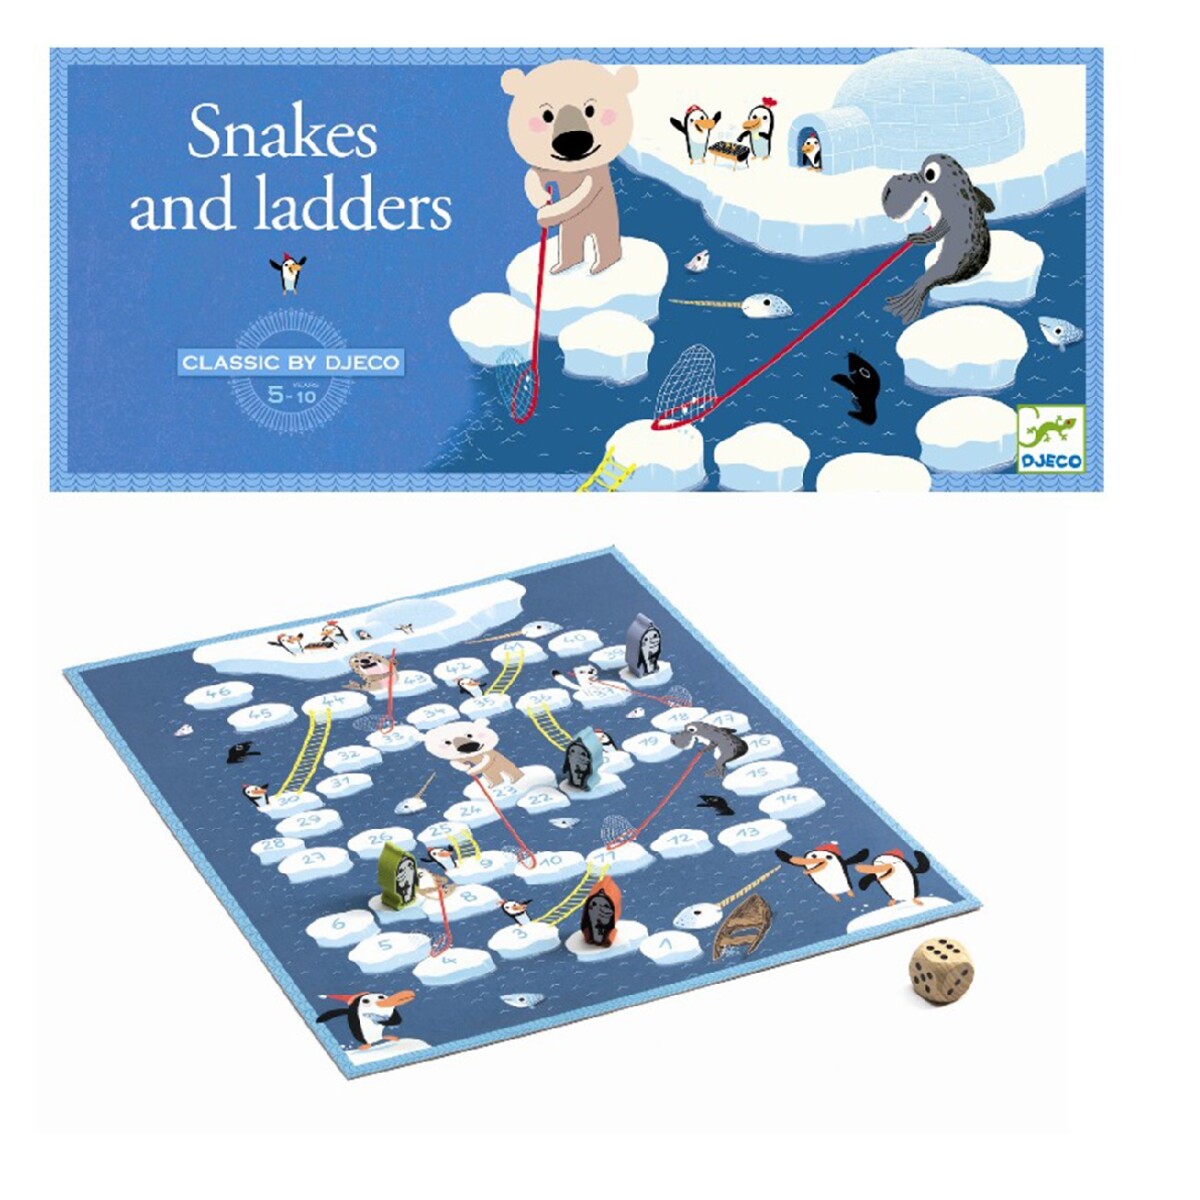 Snake and ladders - Único 